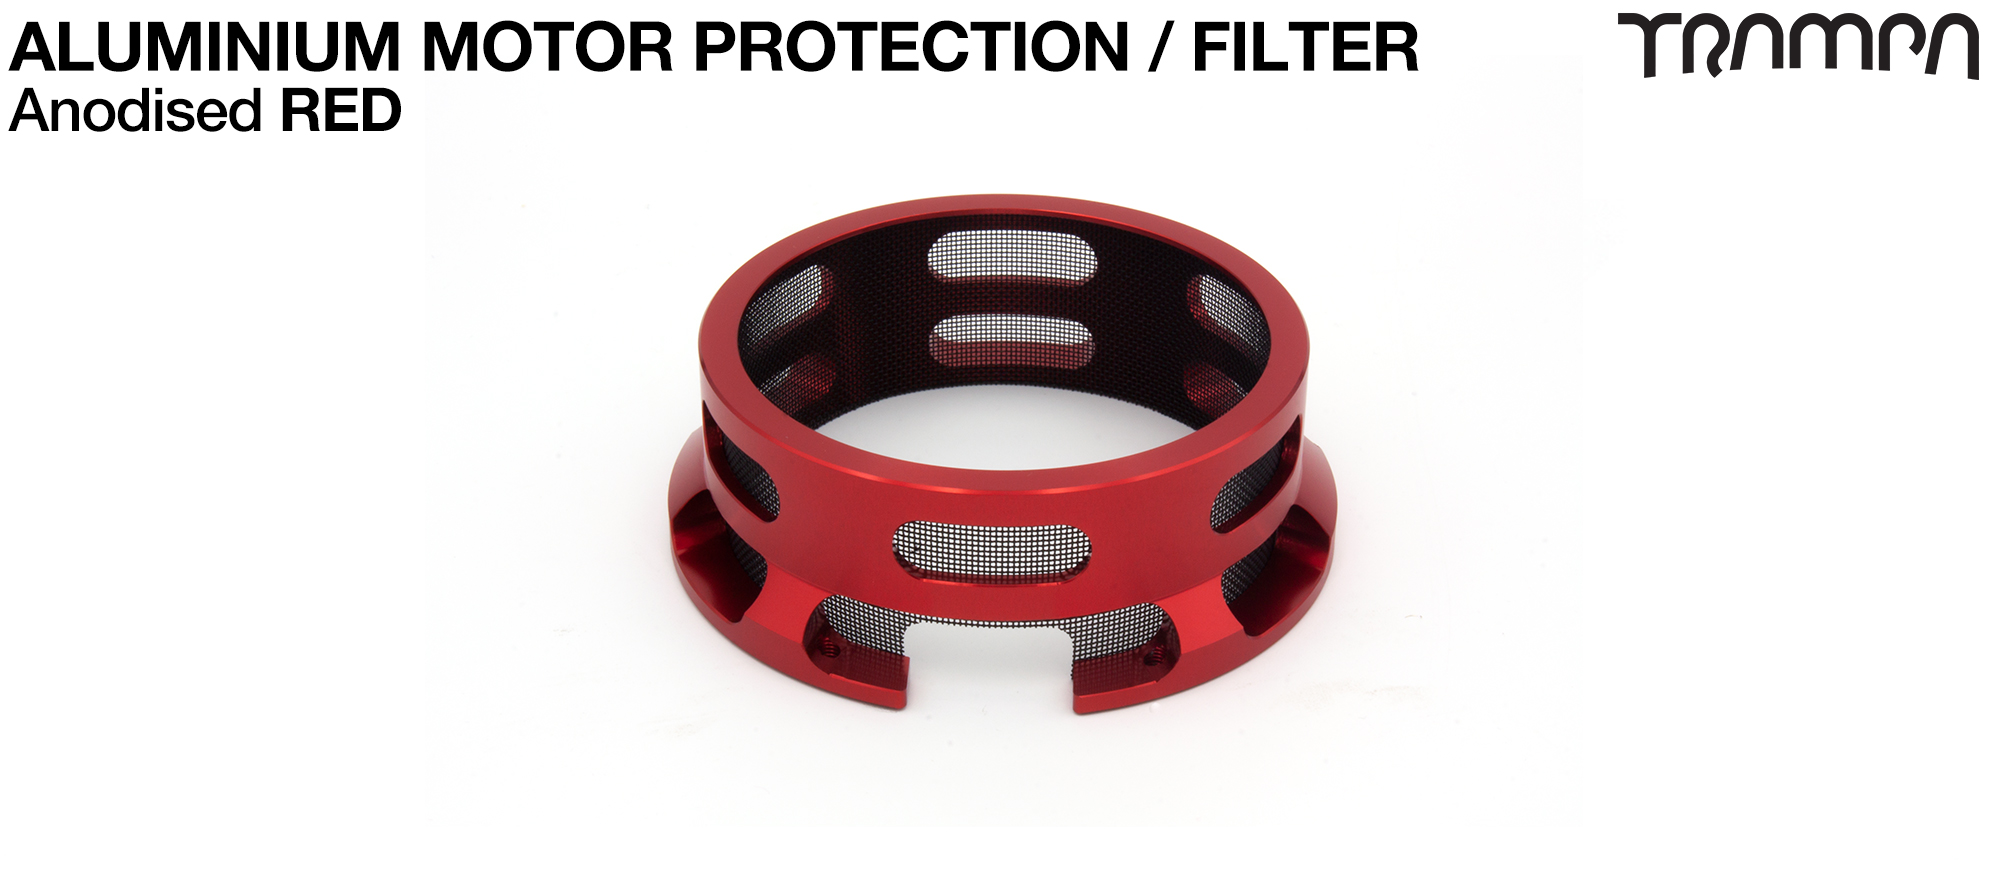 HALF CAGE Motor protection Housing - RED 